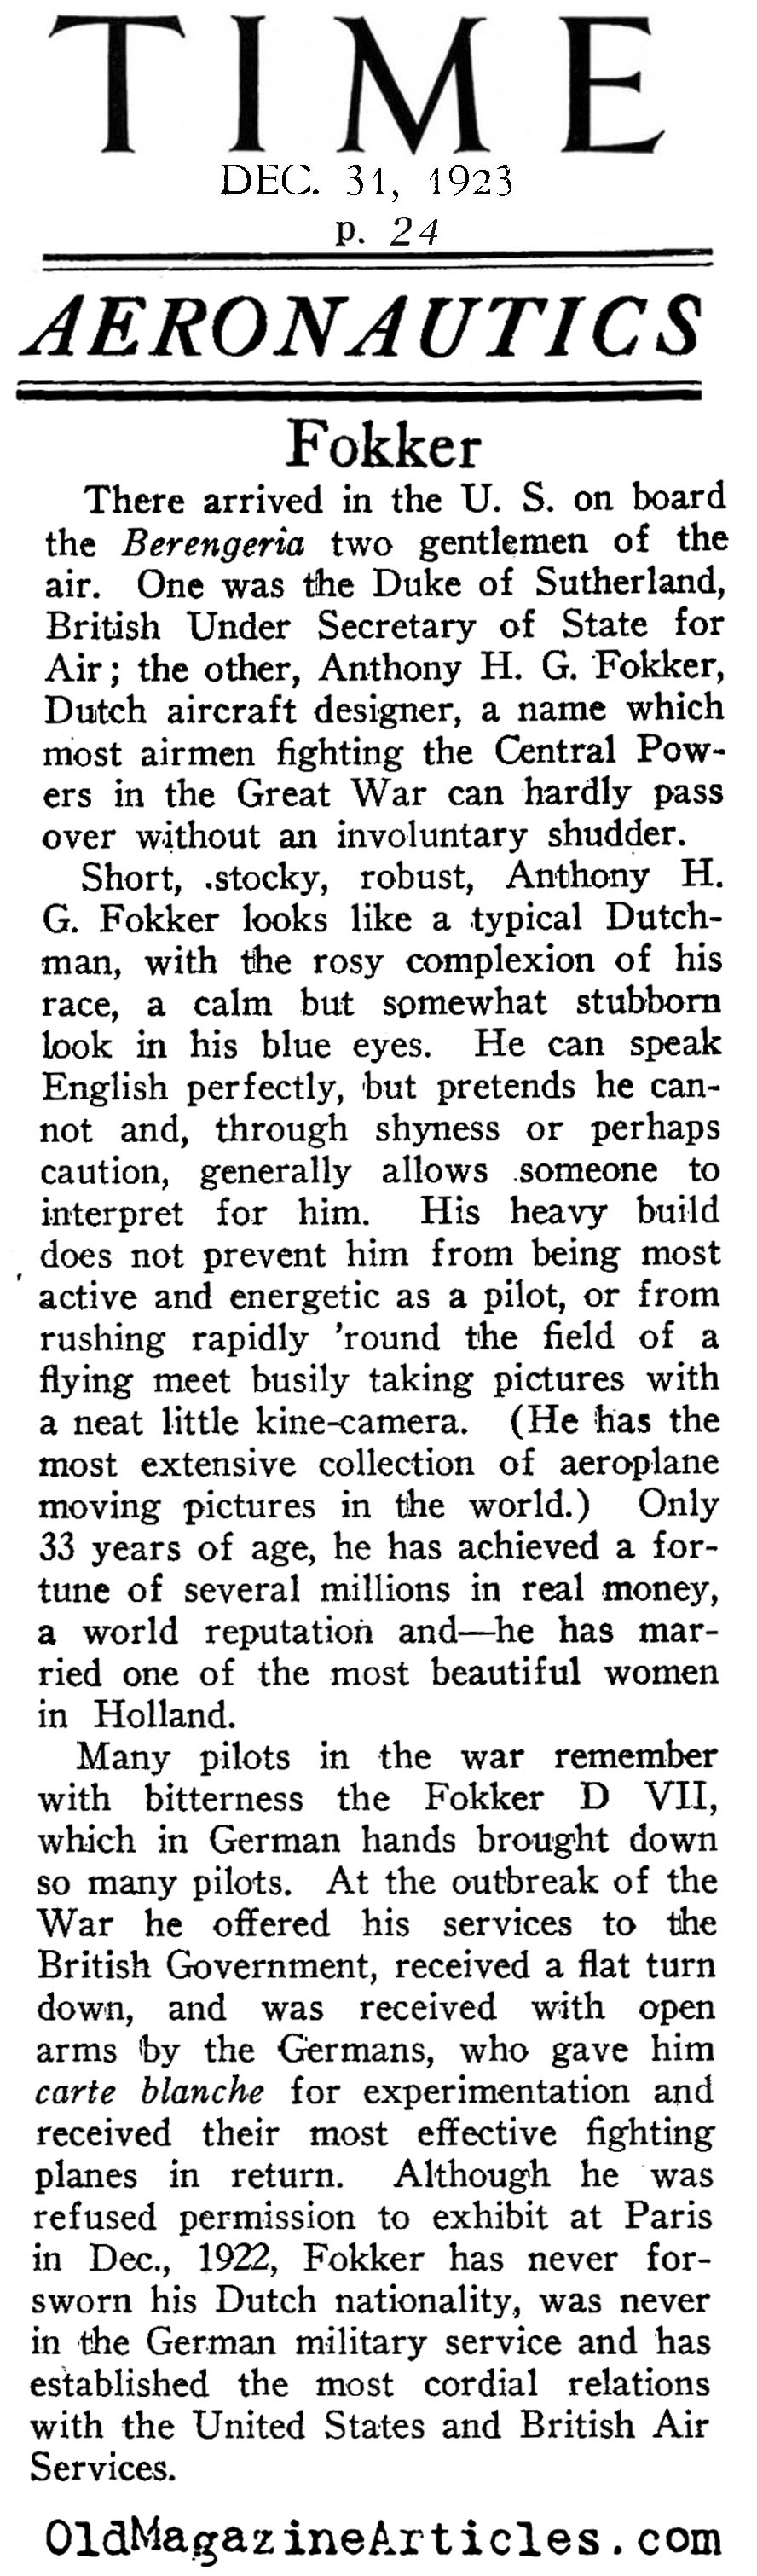 The Great Fokker (Time Magazine, 1923)